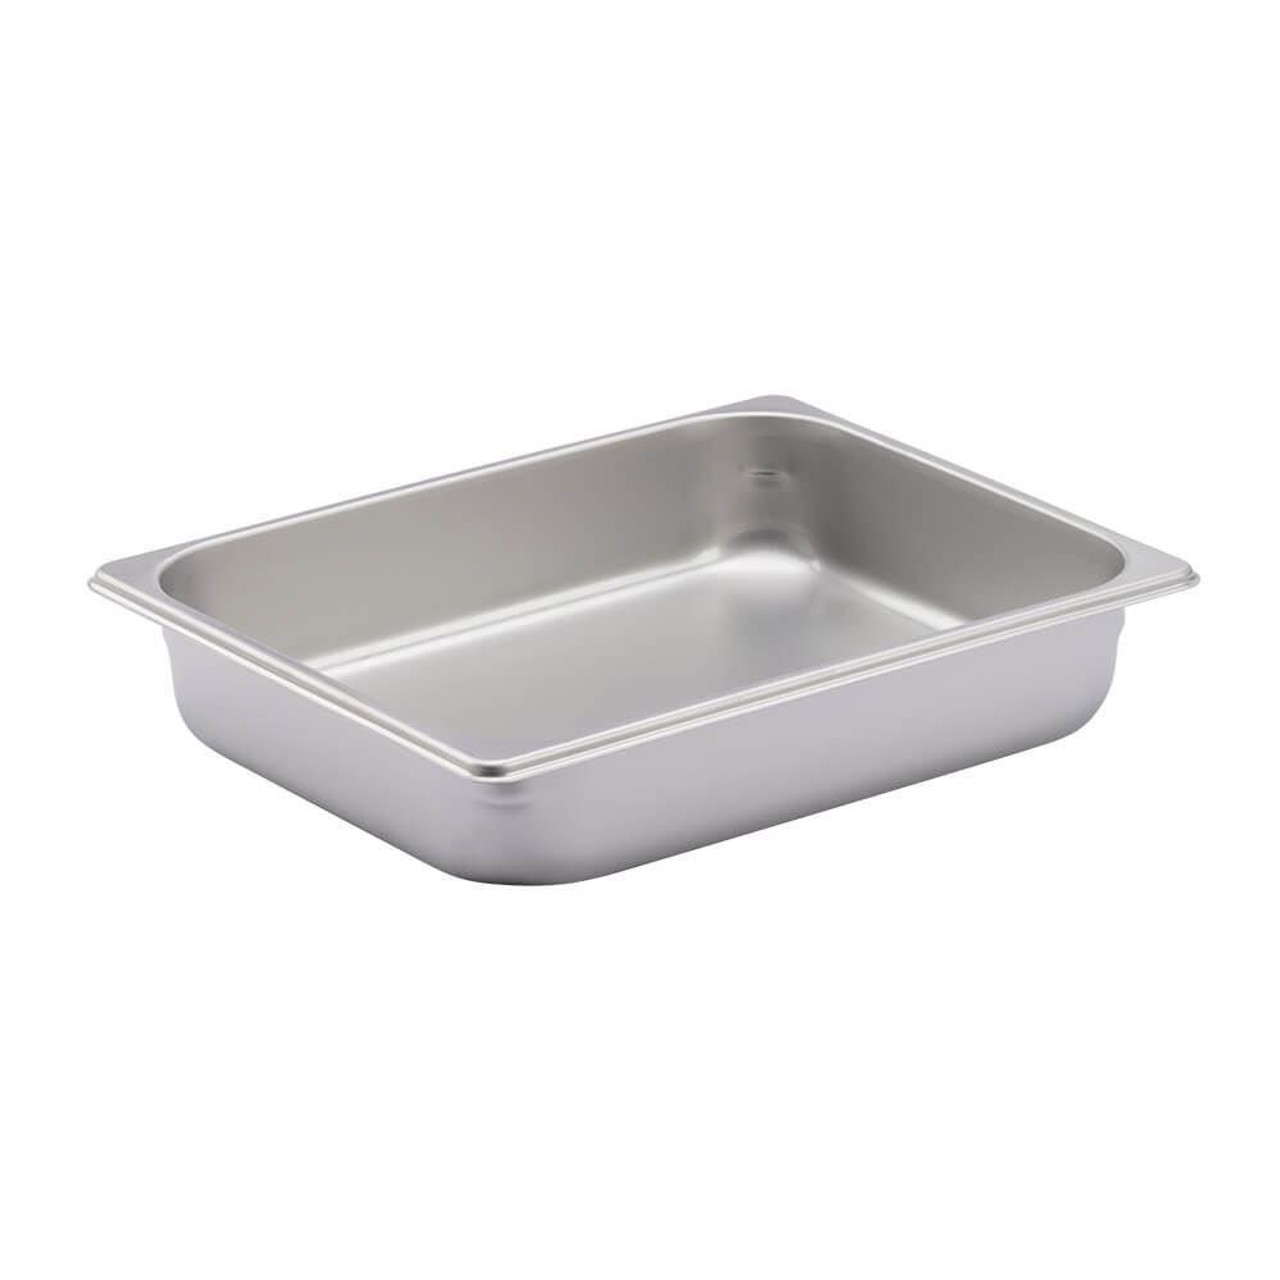 https://cdn11.bigcommerce.com/s-zgzol/images/stencil/1280x1280/products/9121/238520/gilson-company-stainless-steel-pan-rectangular-4qt__56140.1700978451.jpg?c=2